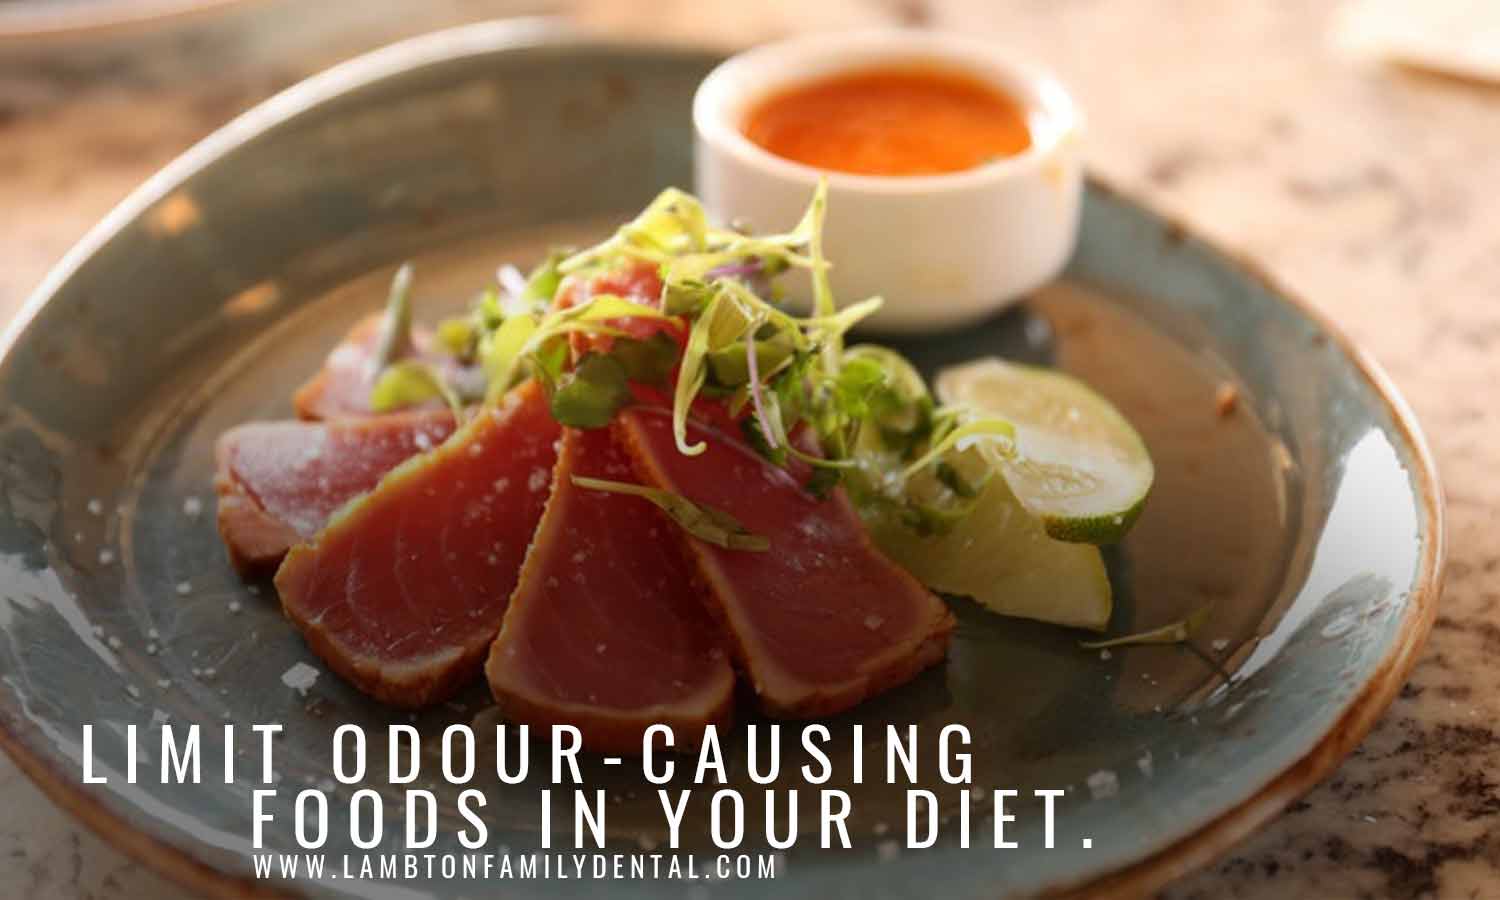 Limit odour-causing foods in your diet